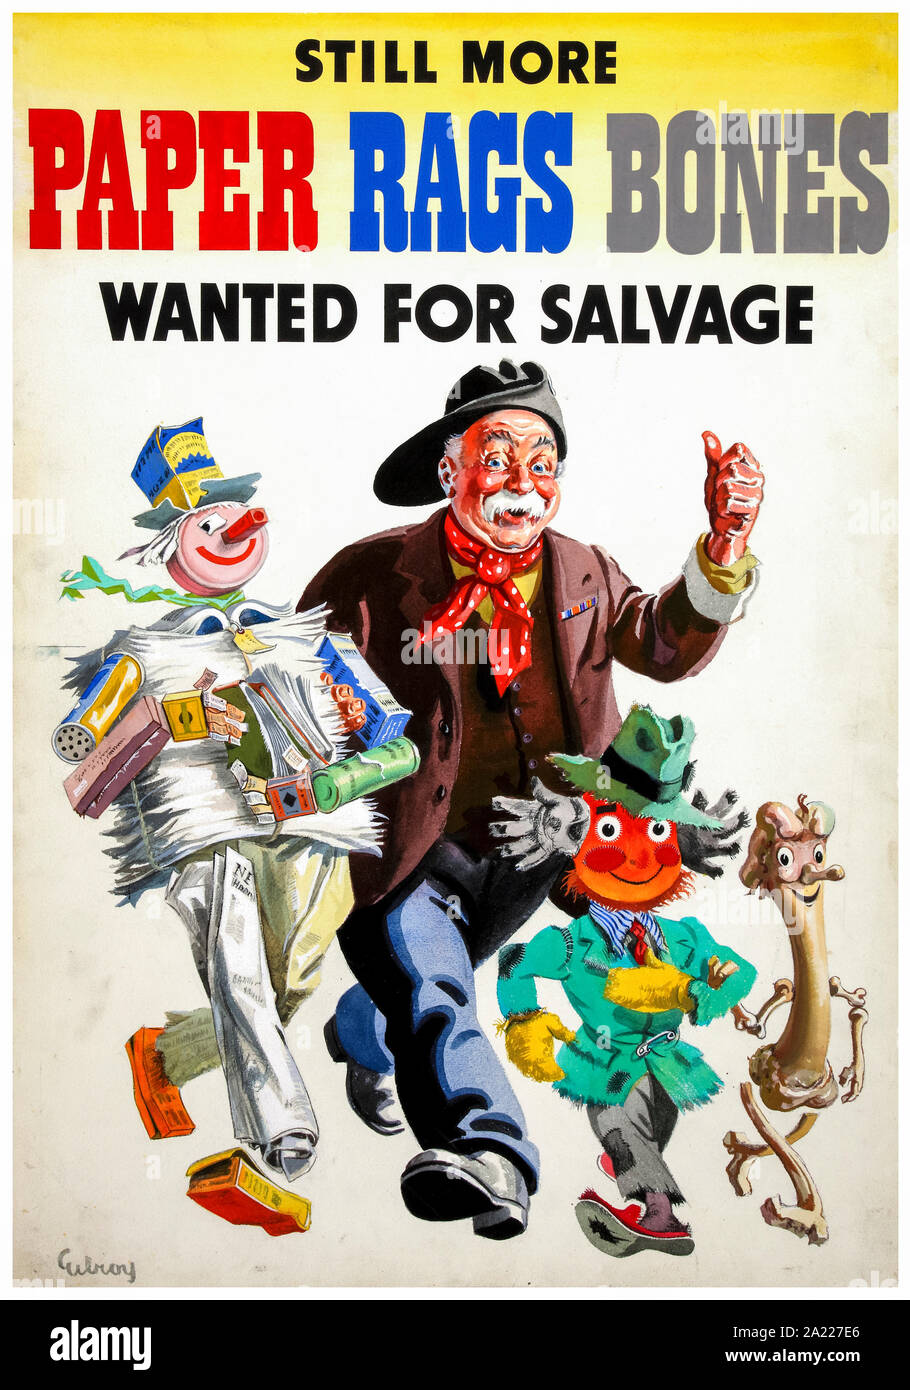 British, WW2, Salvage poster, Still more paper rags bones, wanted for salvage, (rag and bone man) 1939-1946 Stock Photo